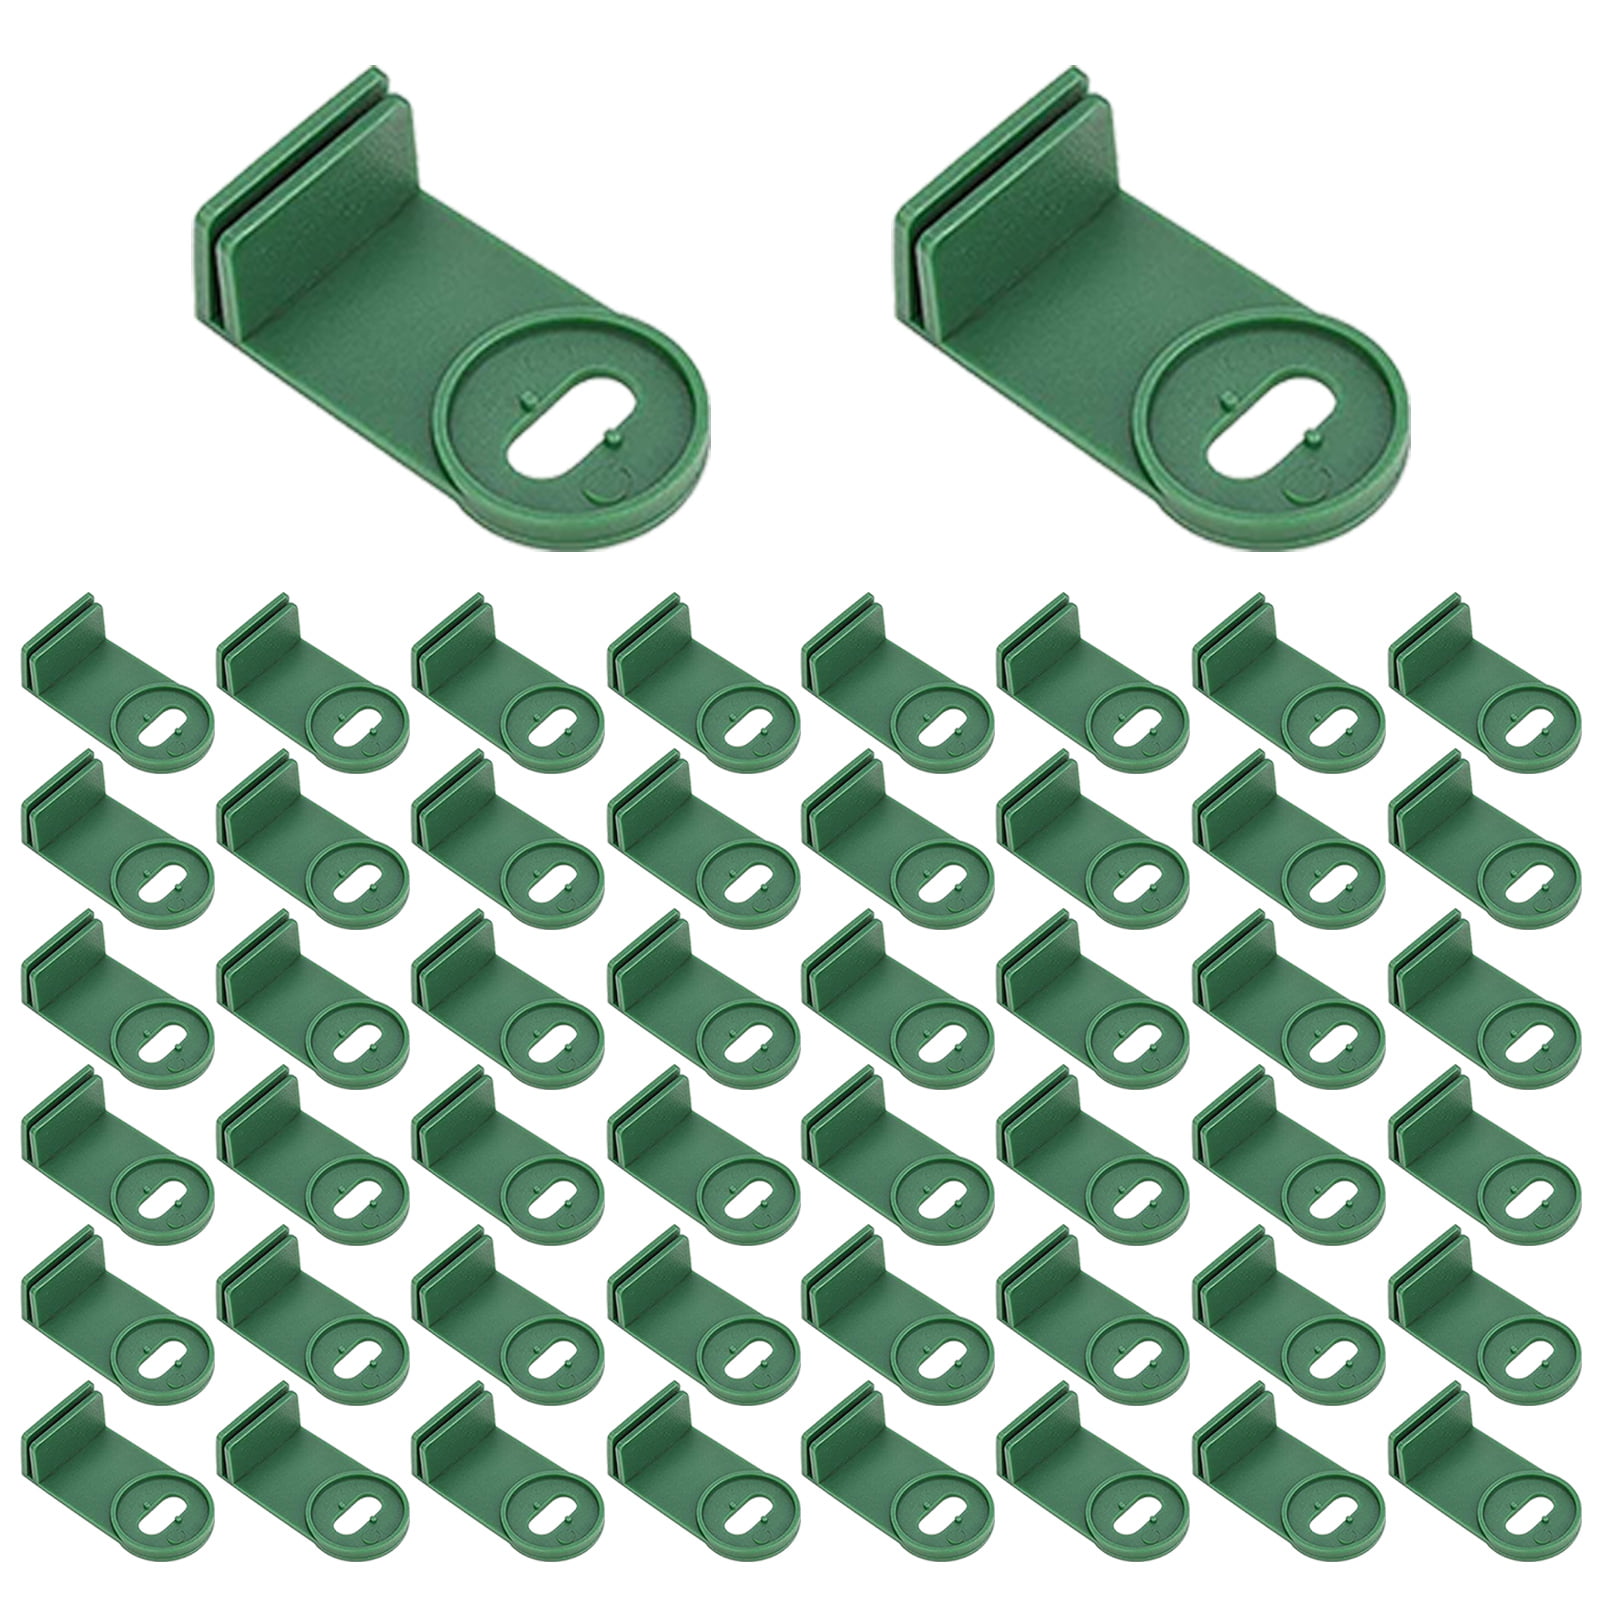 YARNOW 250pcs Greenhouse Fixing Twist Clips Plastic Shading Clips Washers Extenders Clips Corner Clips for Aluminium Greenhouse Insulation Bubble Netting Wrap Style 2 